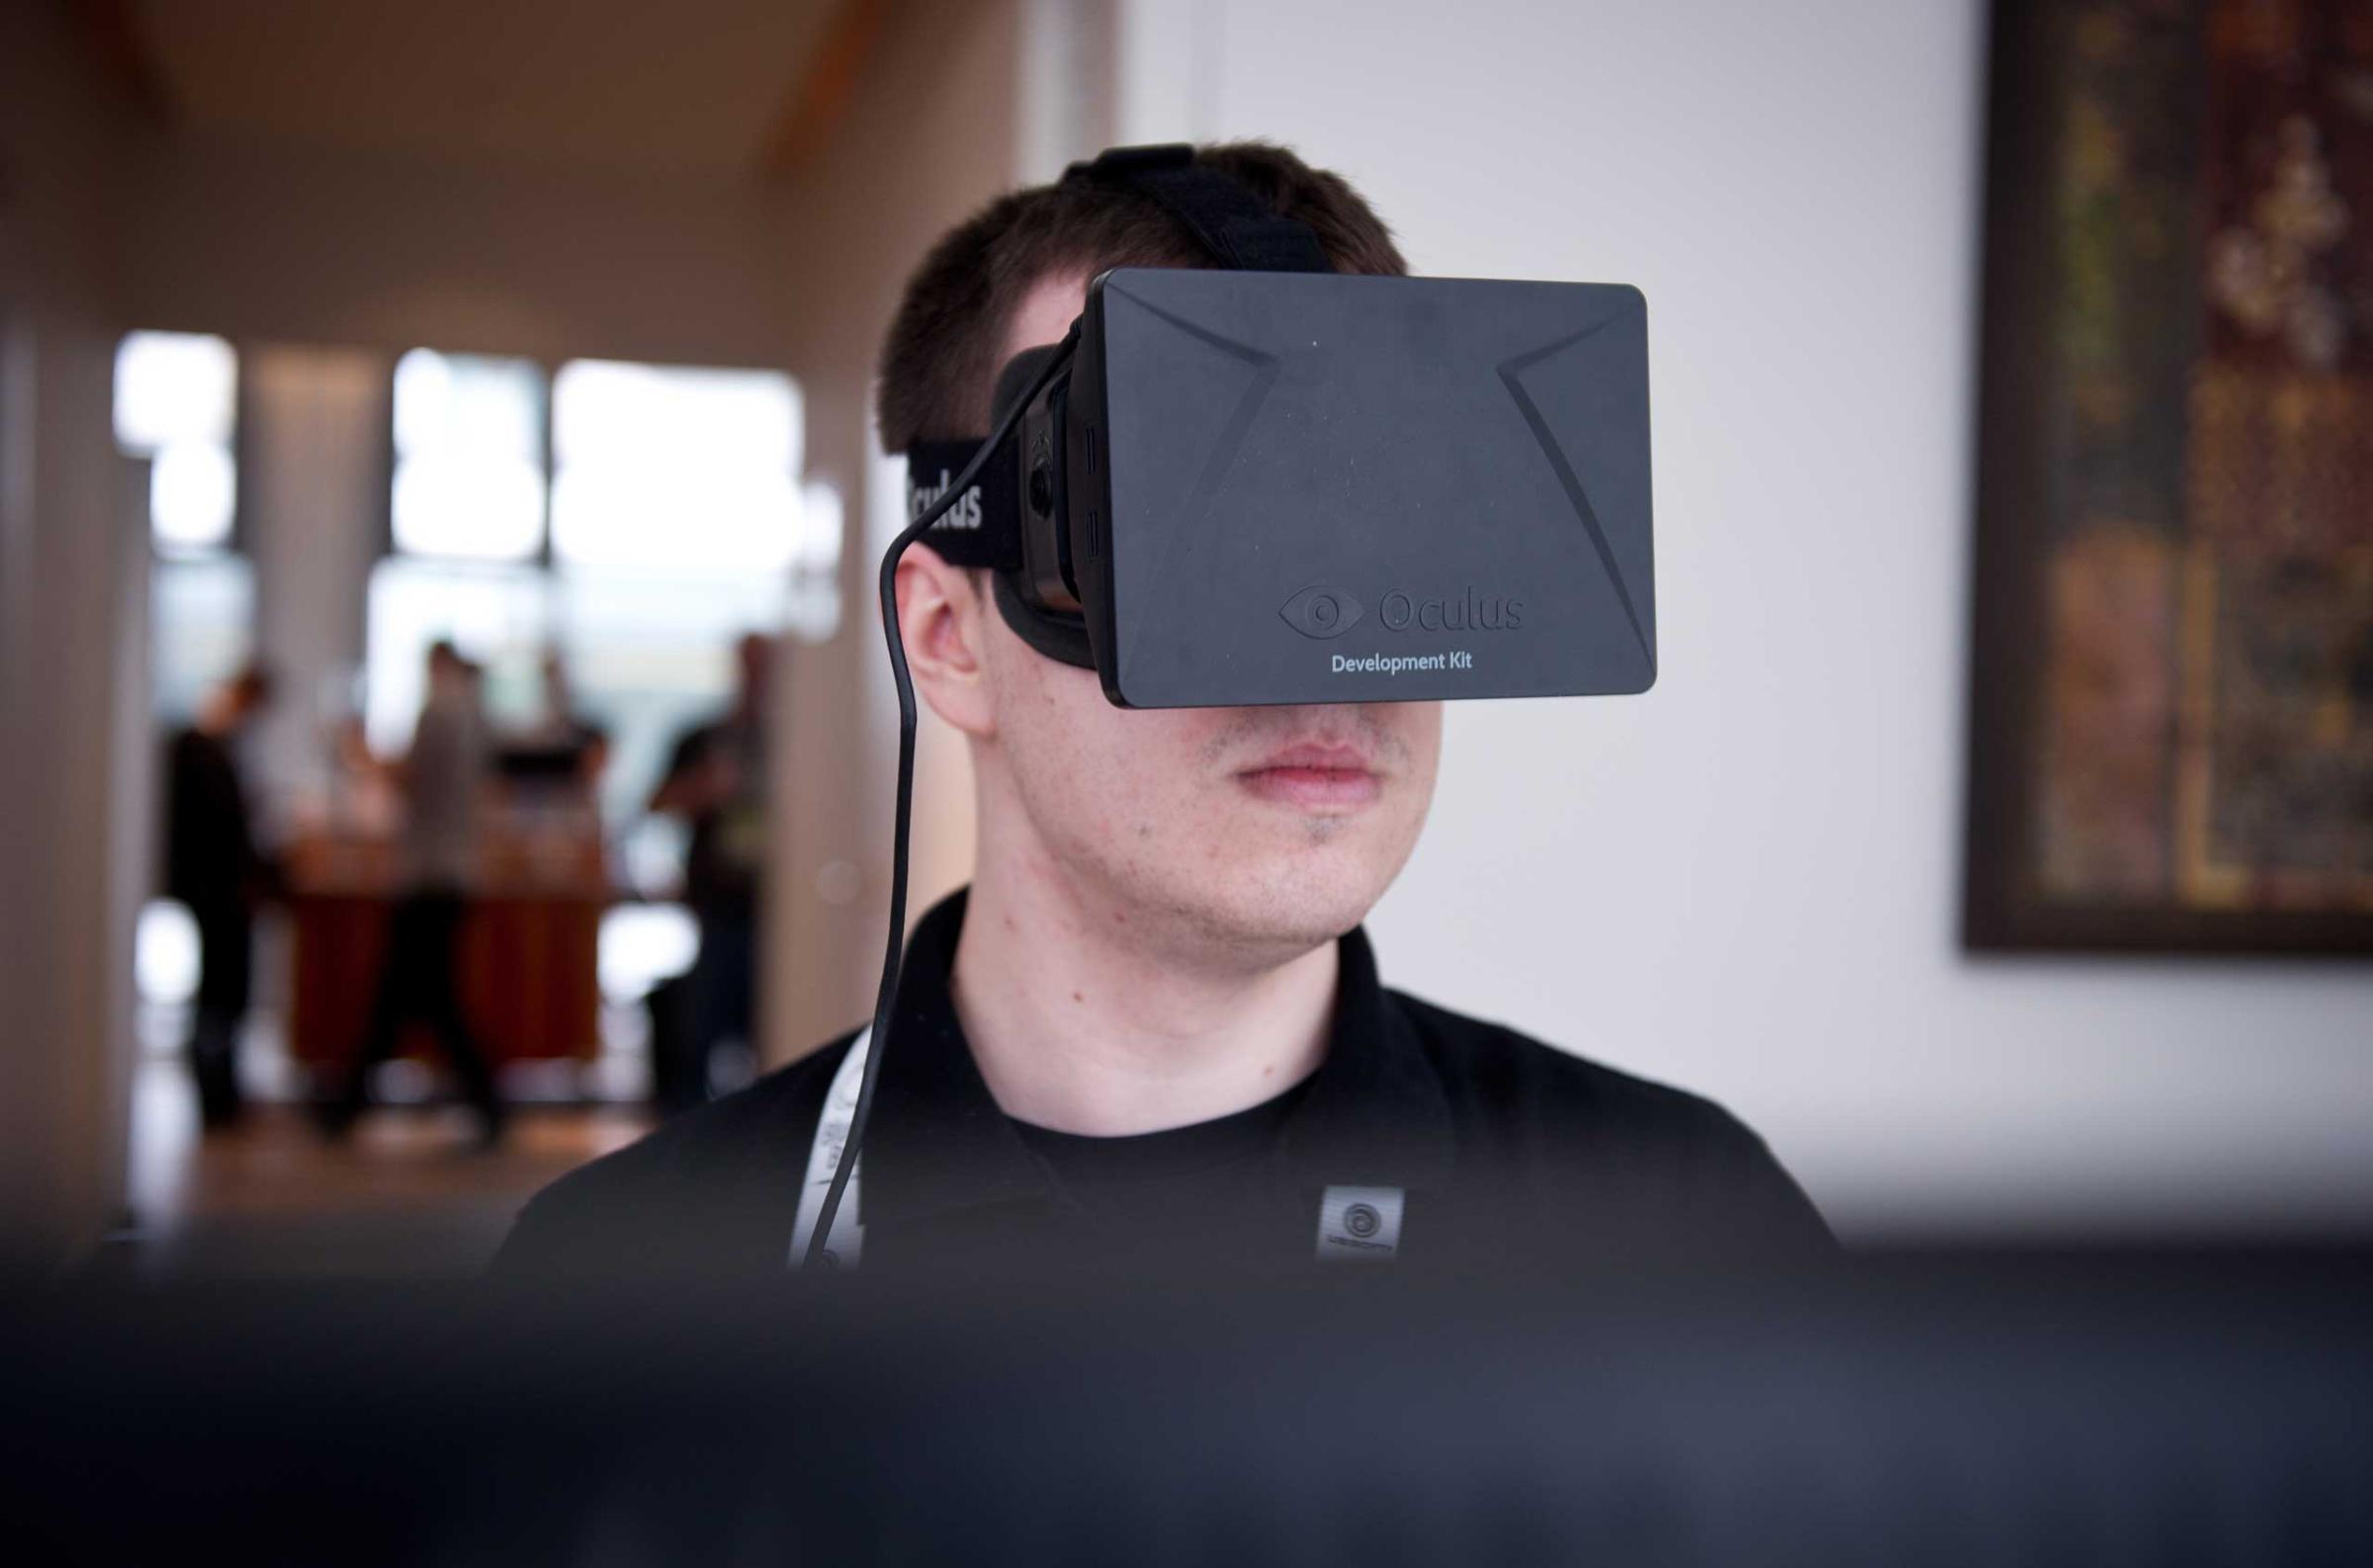 A man played a game with the virtual reality head-mounted display 'Oculus Rift' at International Games Week in Berlin. The display transfers the eye movements to the game in real time.